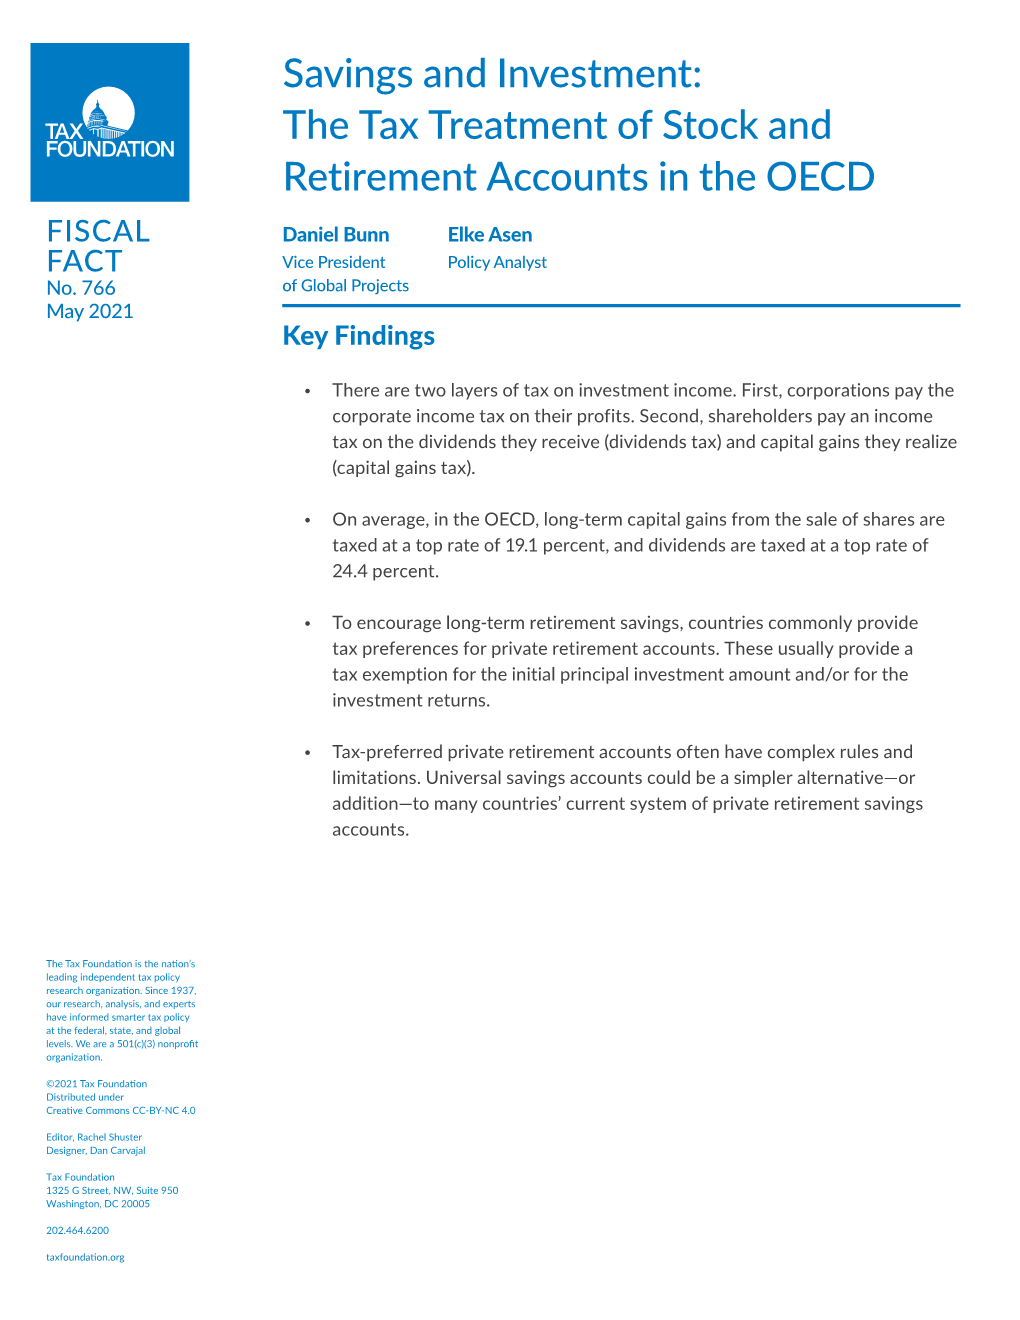 The Tax Treatment of Stock and Retirement Accounts in the OECD